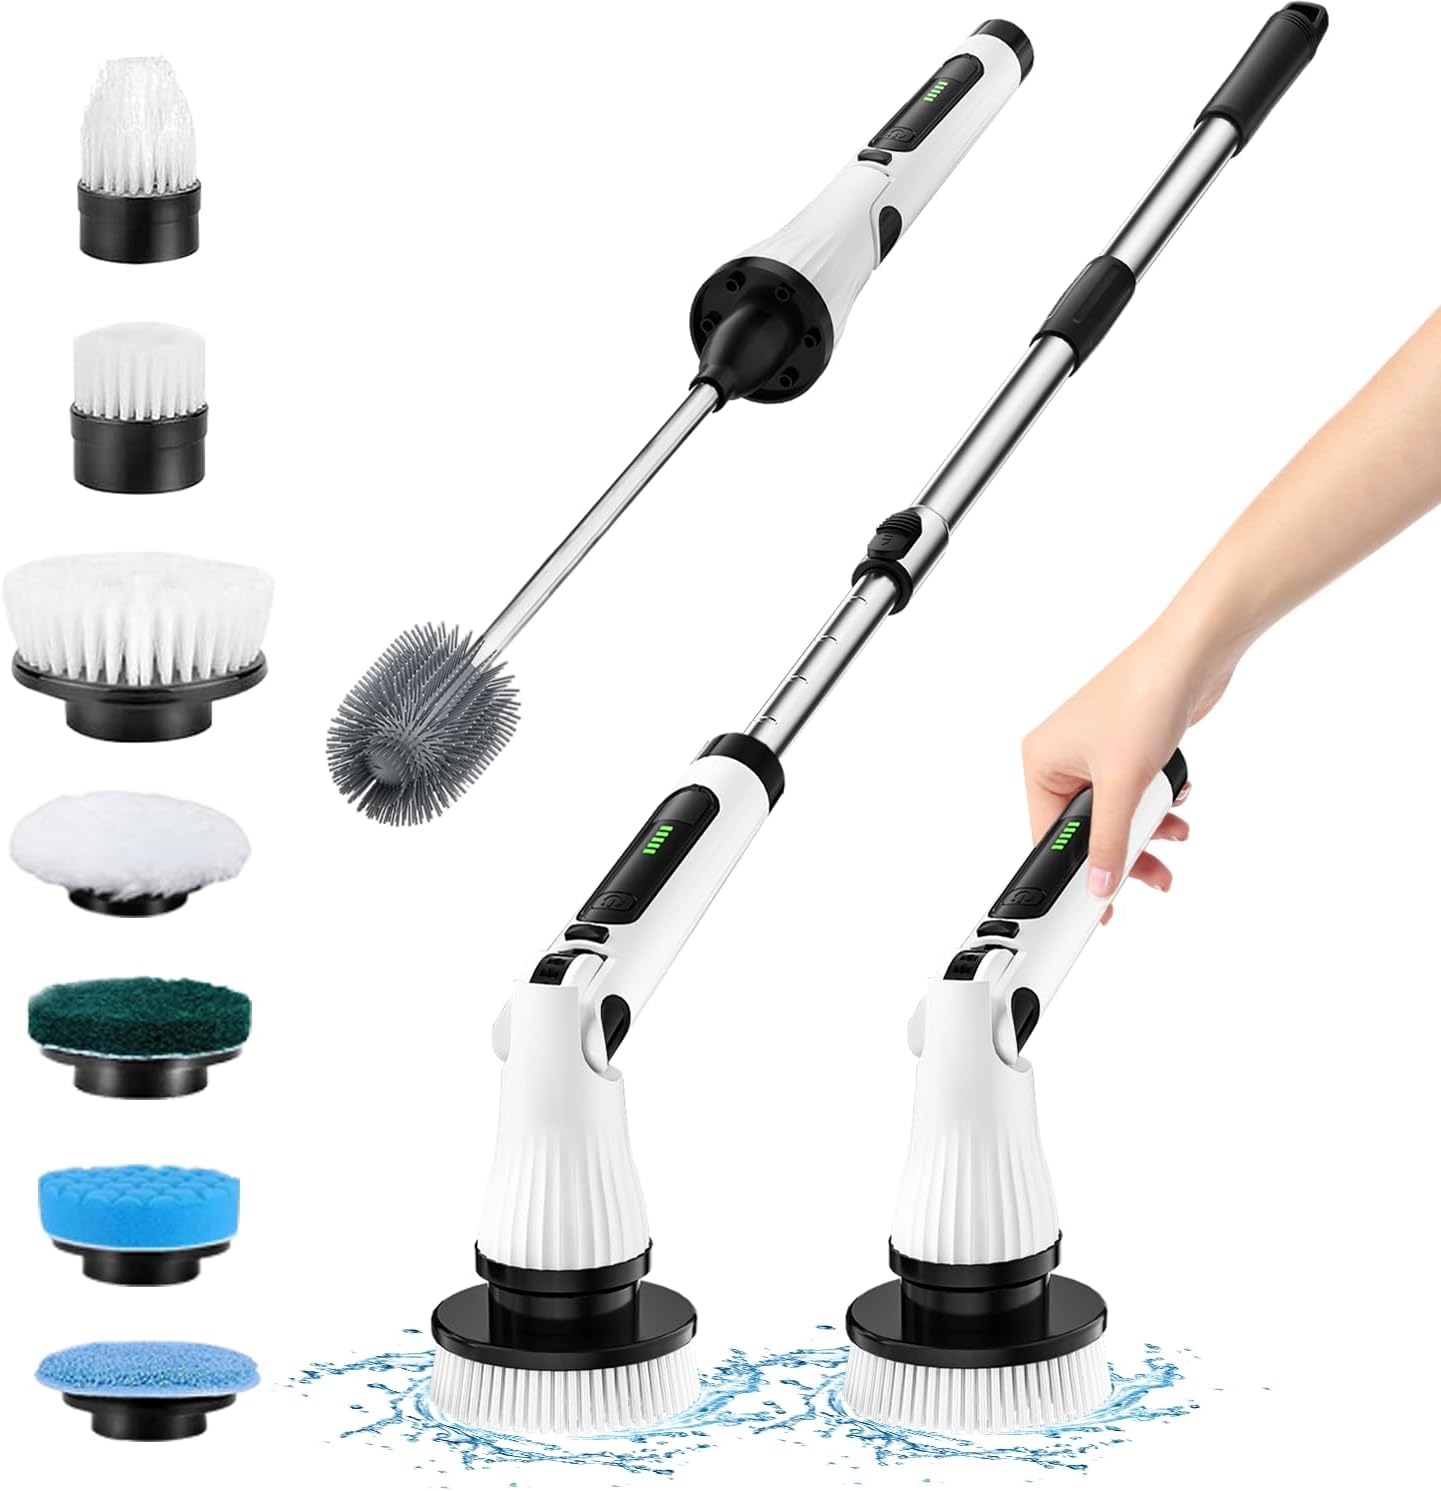 Super Sonic Scrubber with Household All Purpose 5 Brush Heads by  SonicScrubber